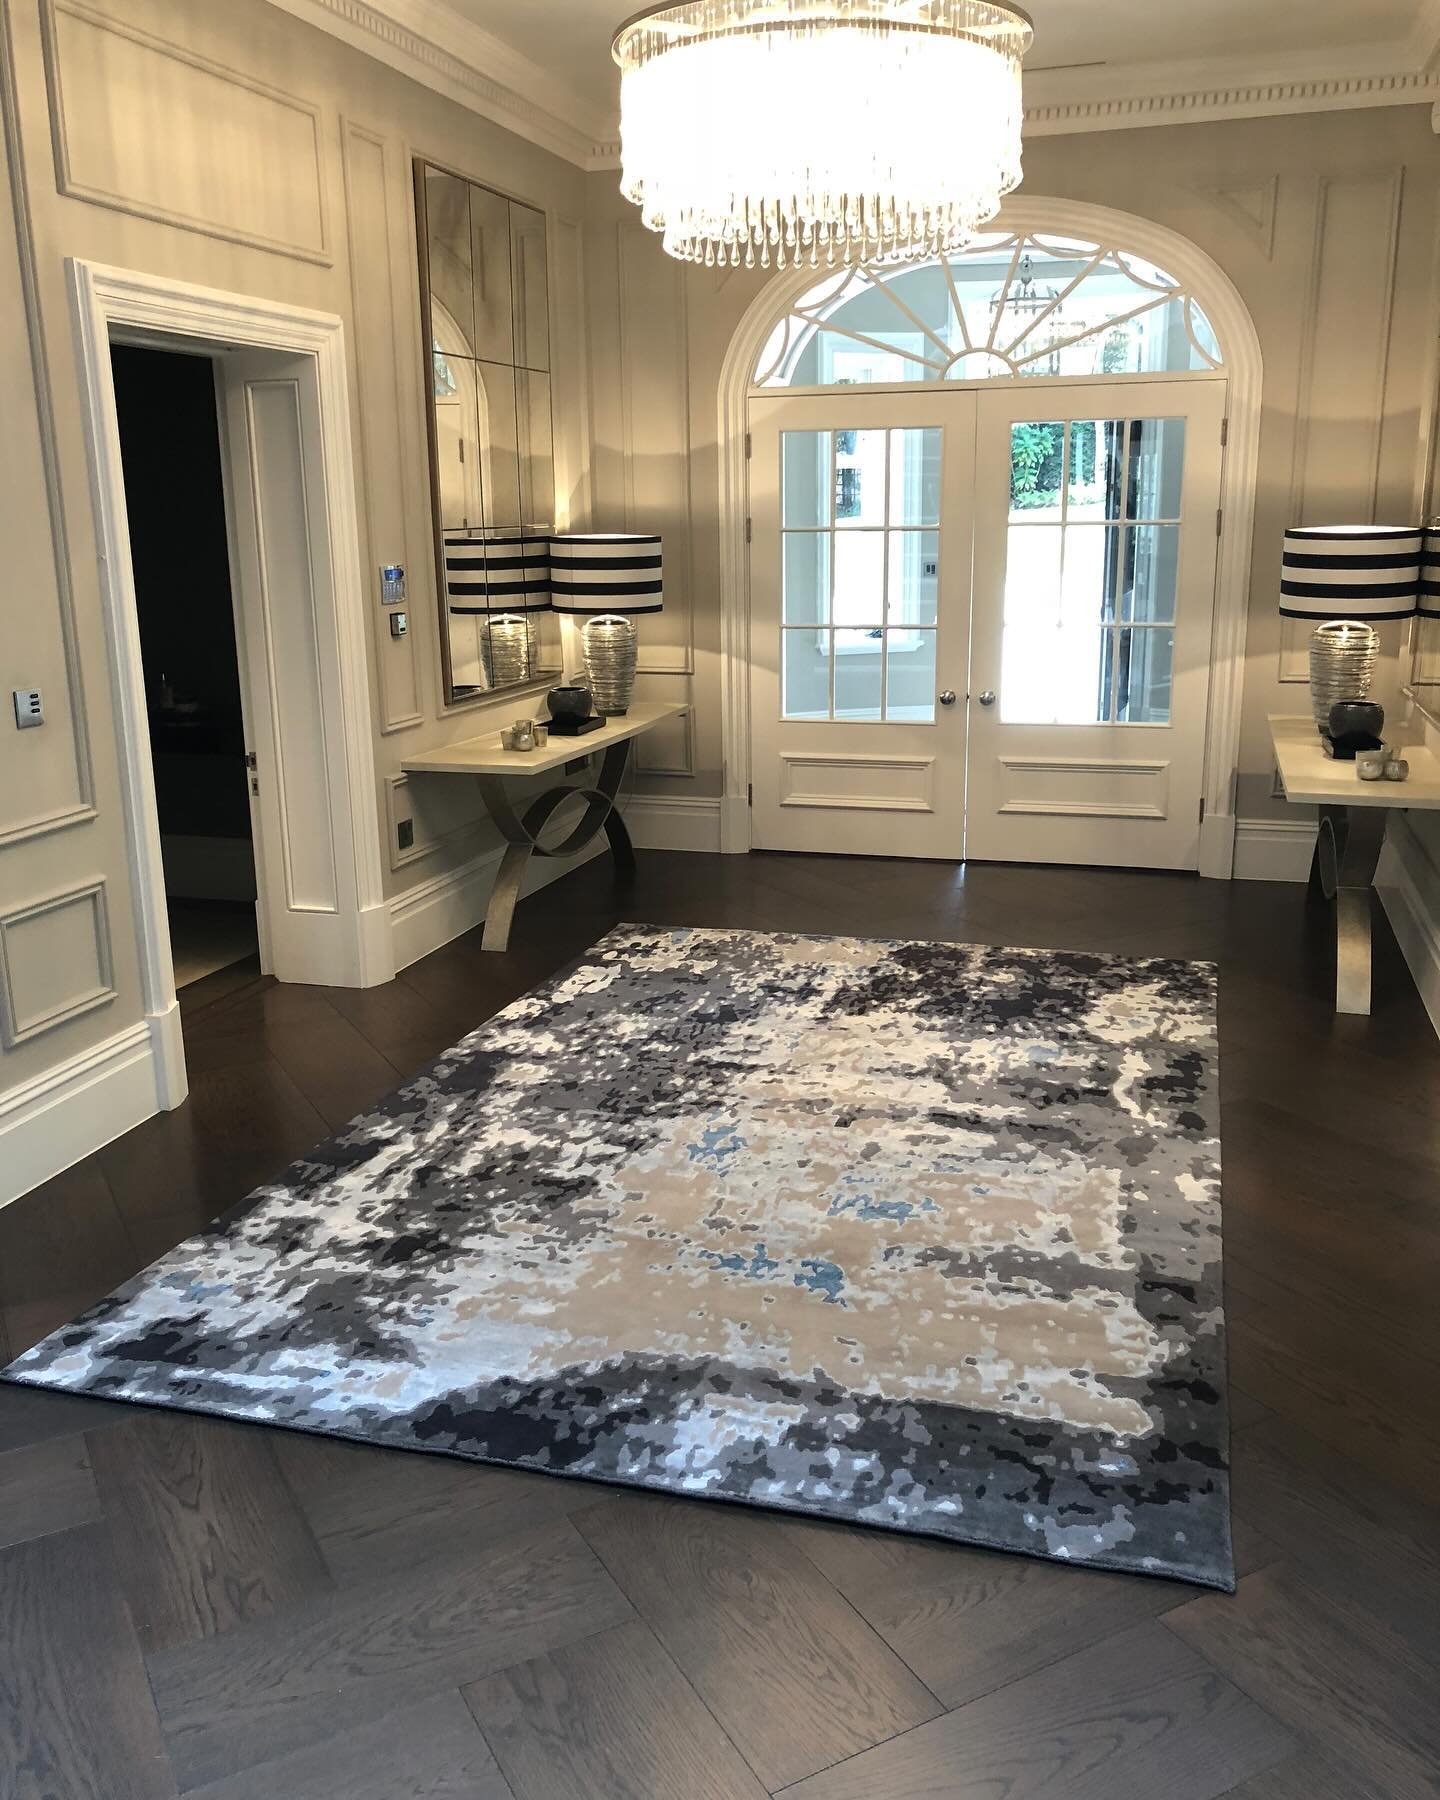 Just a reminder that we offer a bespoke rug making service and also have a wide range of carpets and ready made rugs on offer ✨

📍DM for more details 

.
.
.
.

#woodfloors #flooring #woodflooring #interiordesign #hardwoodfloors #hardwoodflooring #w